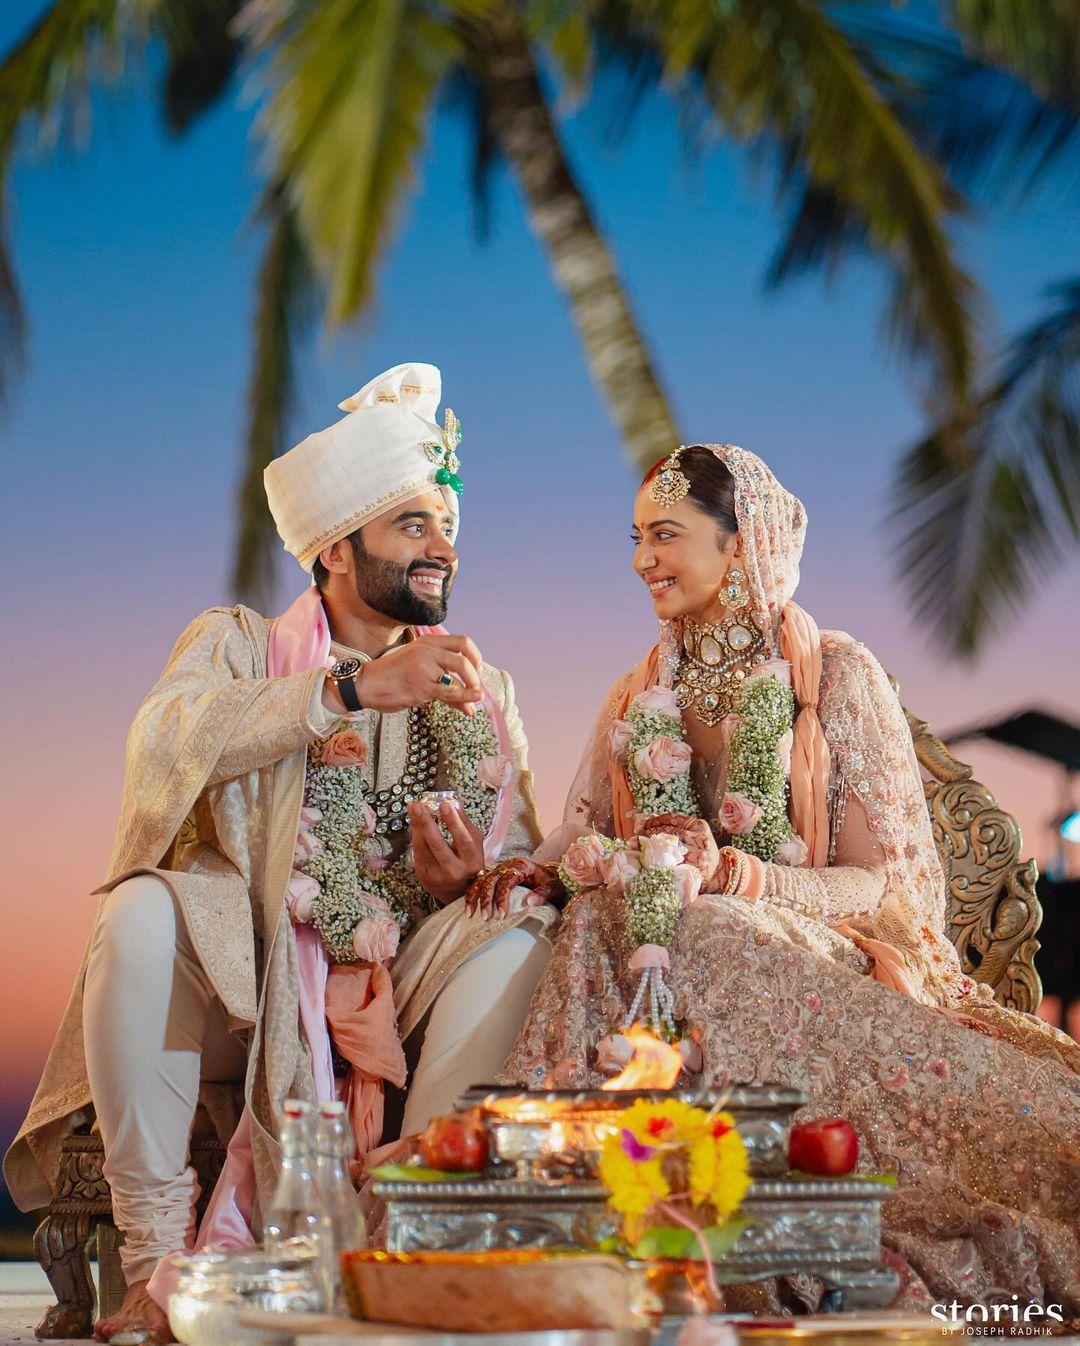 Actor Rakul Preet Singh and producer Jackky Bhagnani tied the knot on Wednesday in a scenic destination wedding in Goa in the presence of close friends and family members.